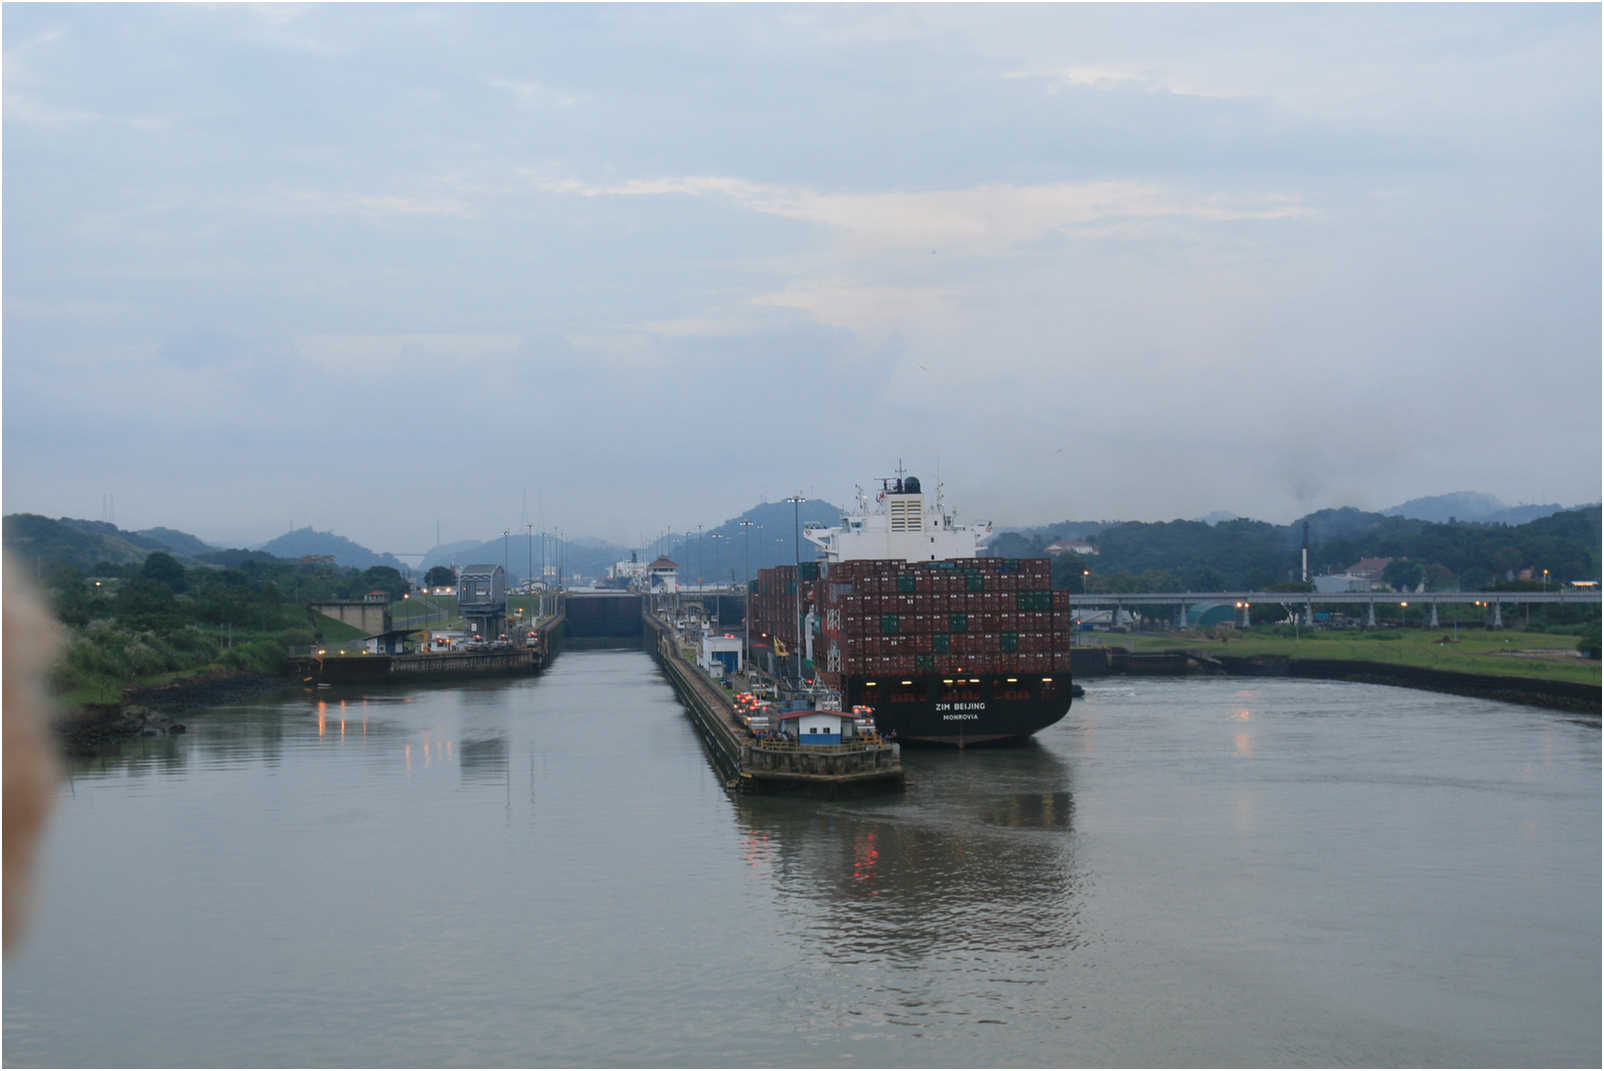 Entering The Panama Canal